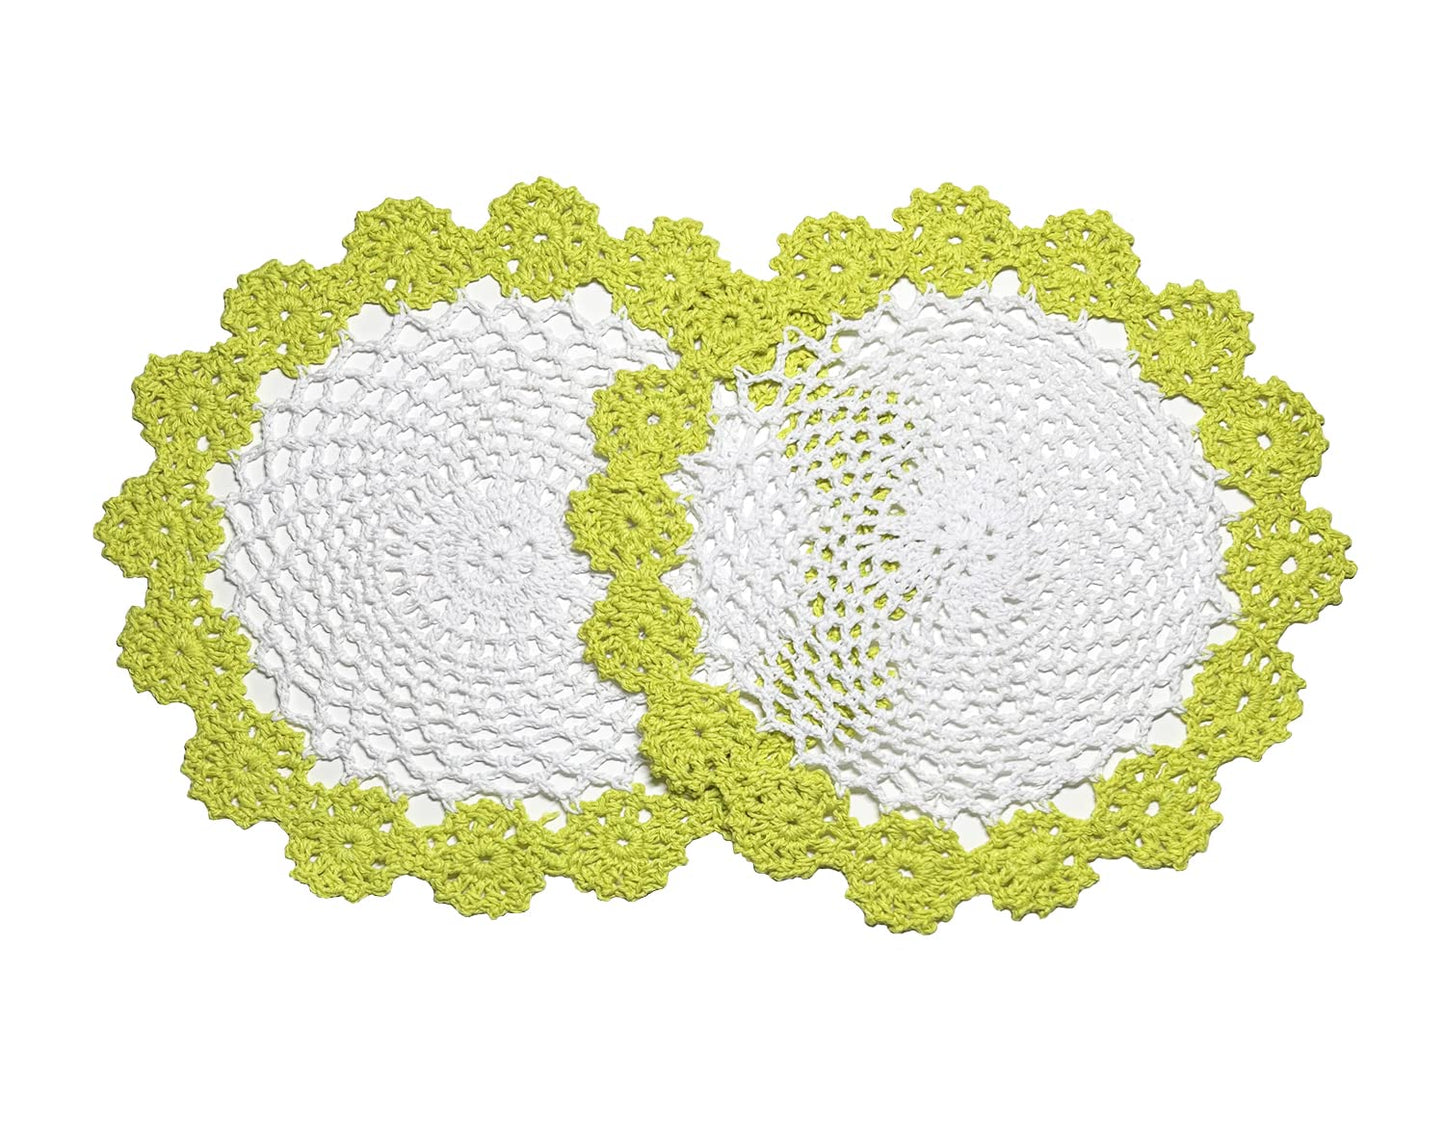 Fennco Styles Handmade Two-Tone Floral Crochet Tray Doily, 9" Round - Cloth Placemat for Everyday Use, Holidays, Home Décor, Cocktail Party, Tea Party, Special Occasion